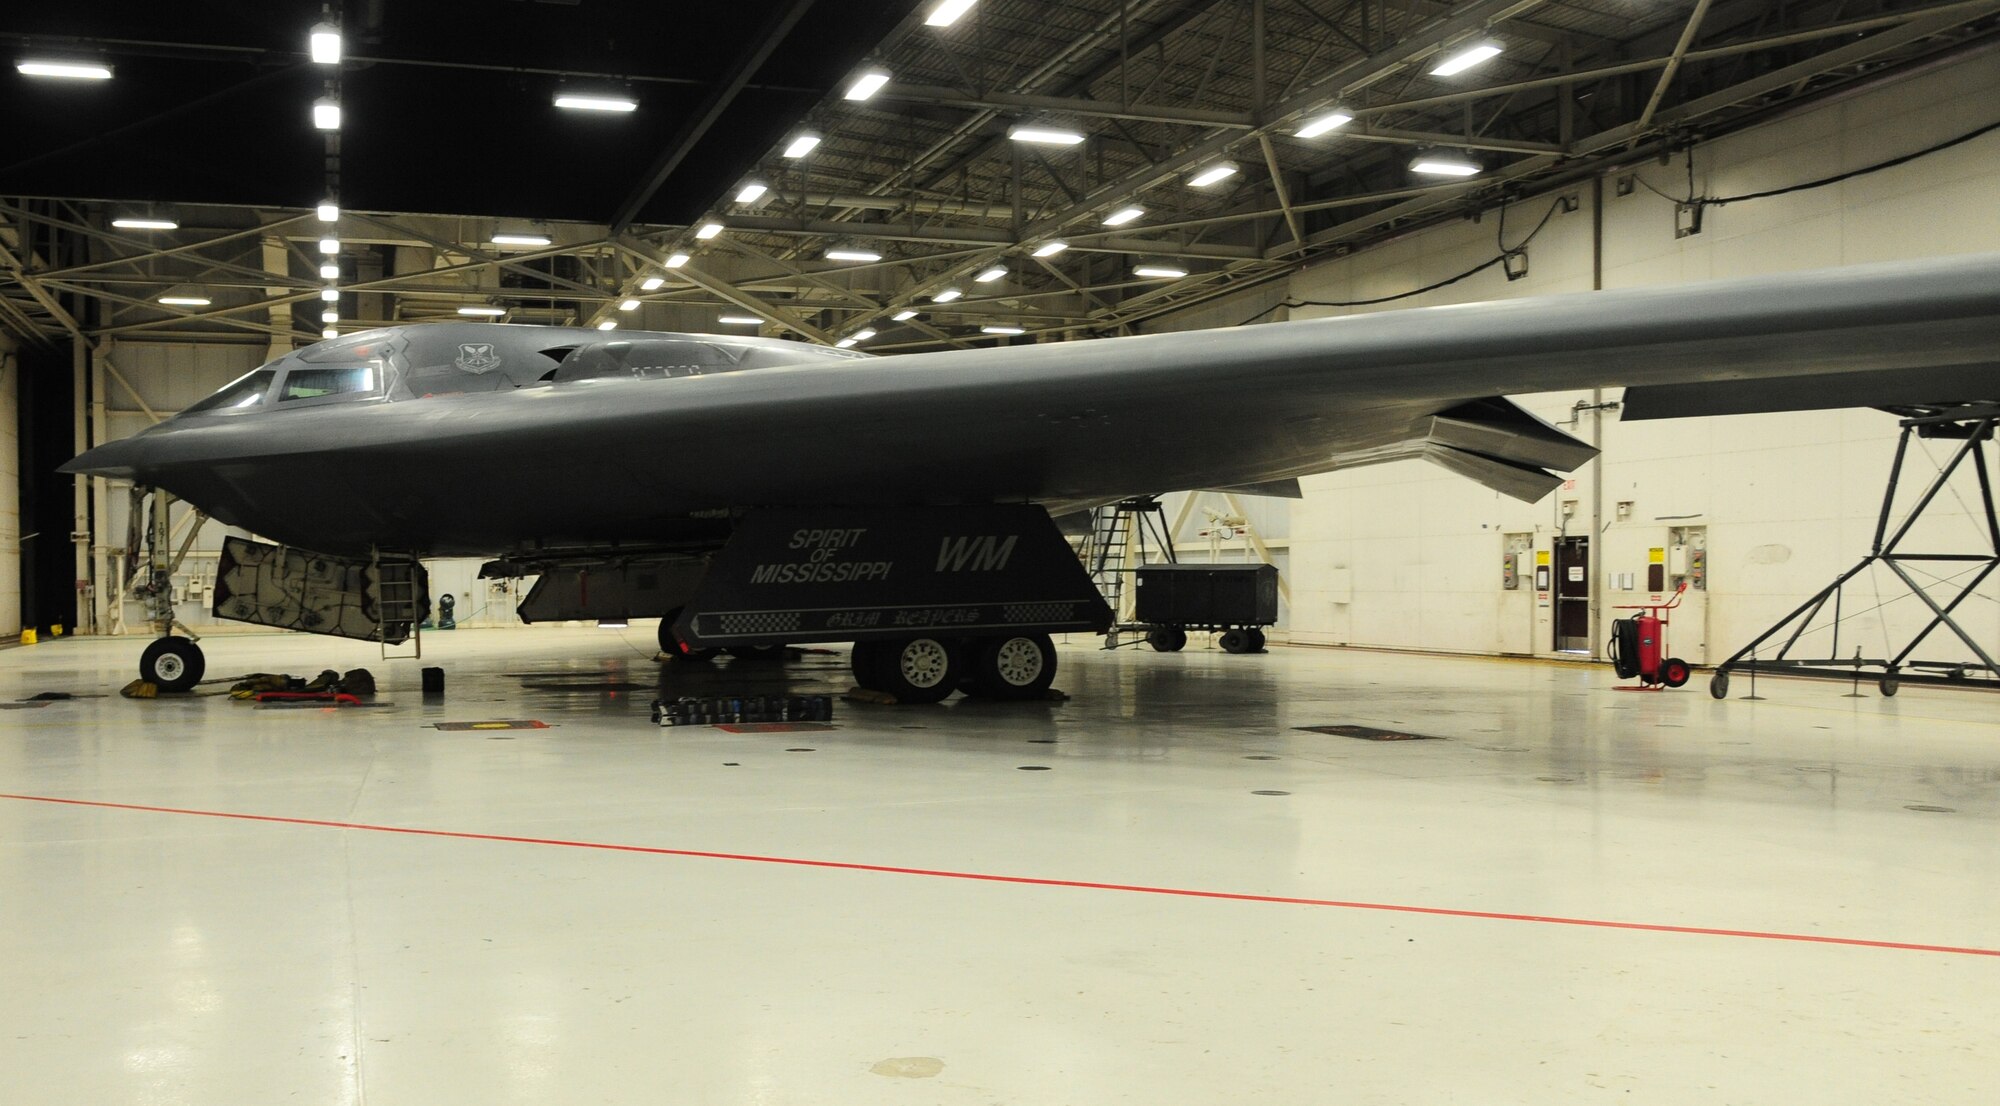 A B-2 Spirit awaits loading procedures during the CONSTANT VIGILANCE 16 exercise at Whiteman Air Force Base, Mo., April 12, 2016. The exercise included simultaneous elements that tested and refined Air Force Global Strikes policies, training and techniques at the tactical and operational levels. (U.S. Air Force photo by Airman 1st Class Keenan Berry)